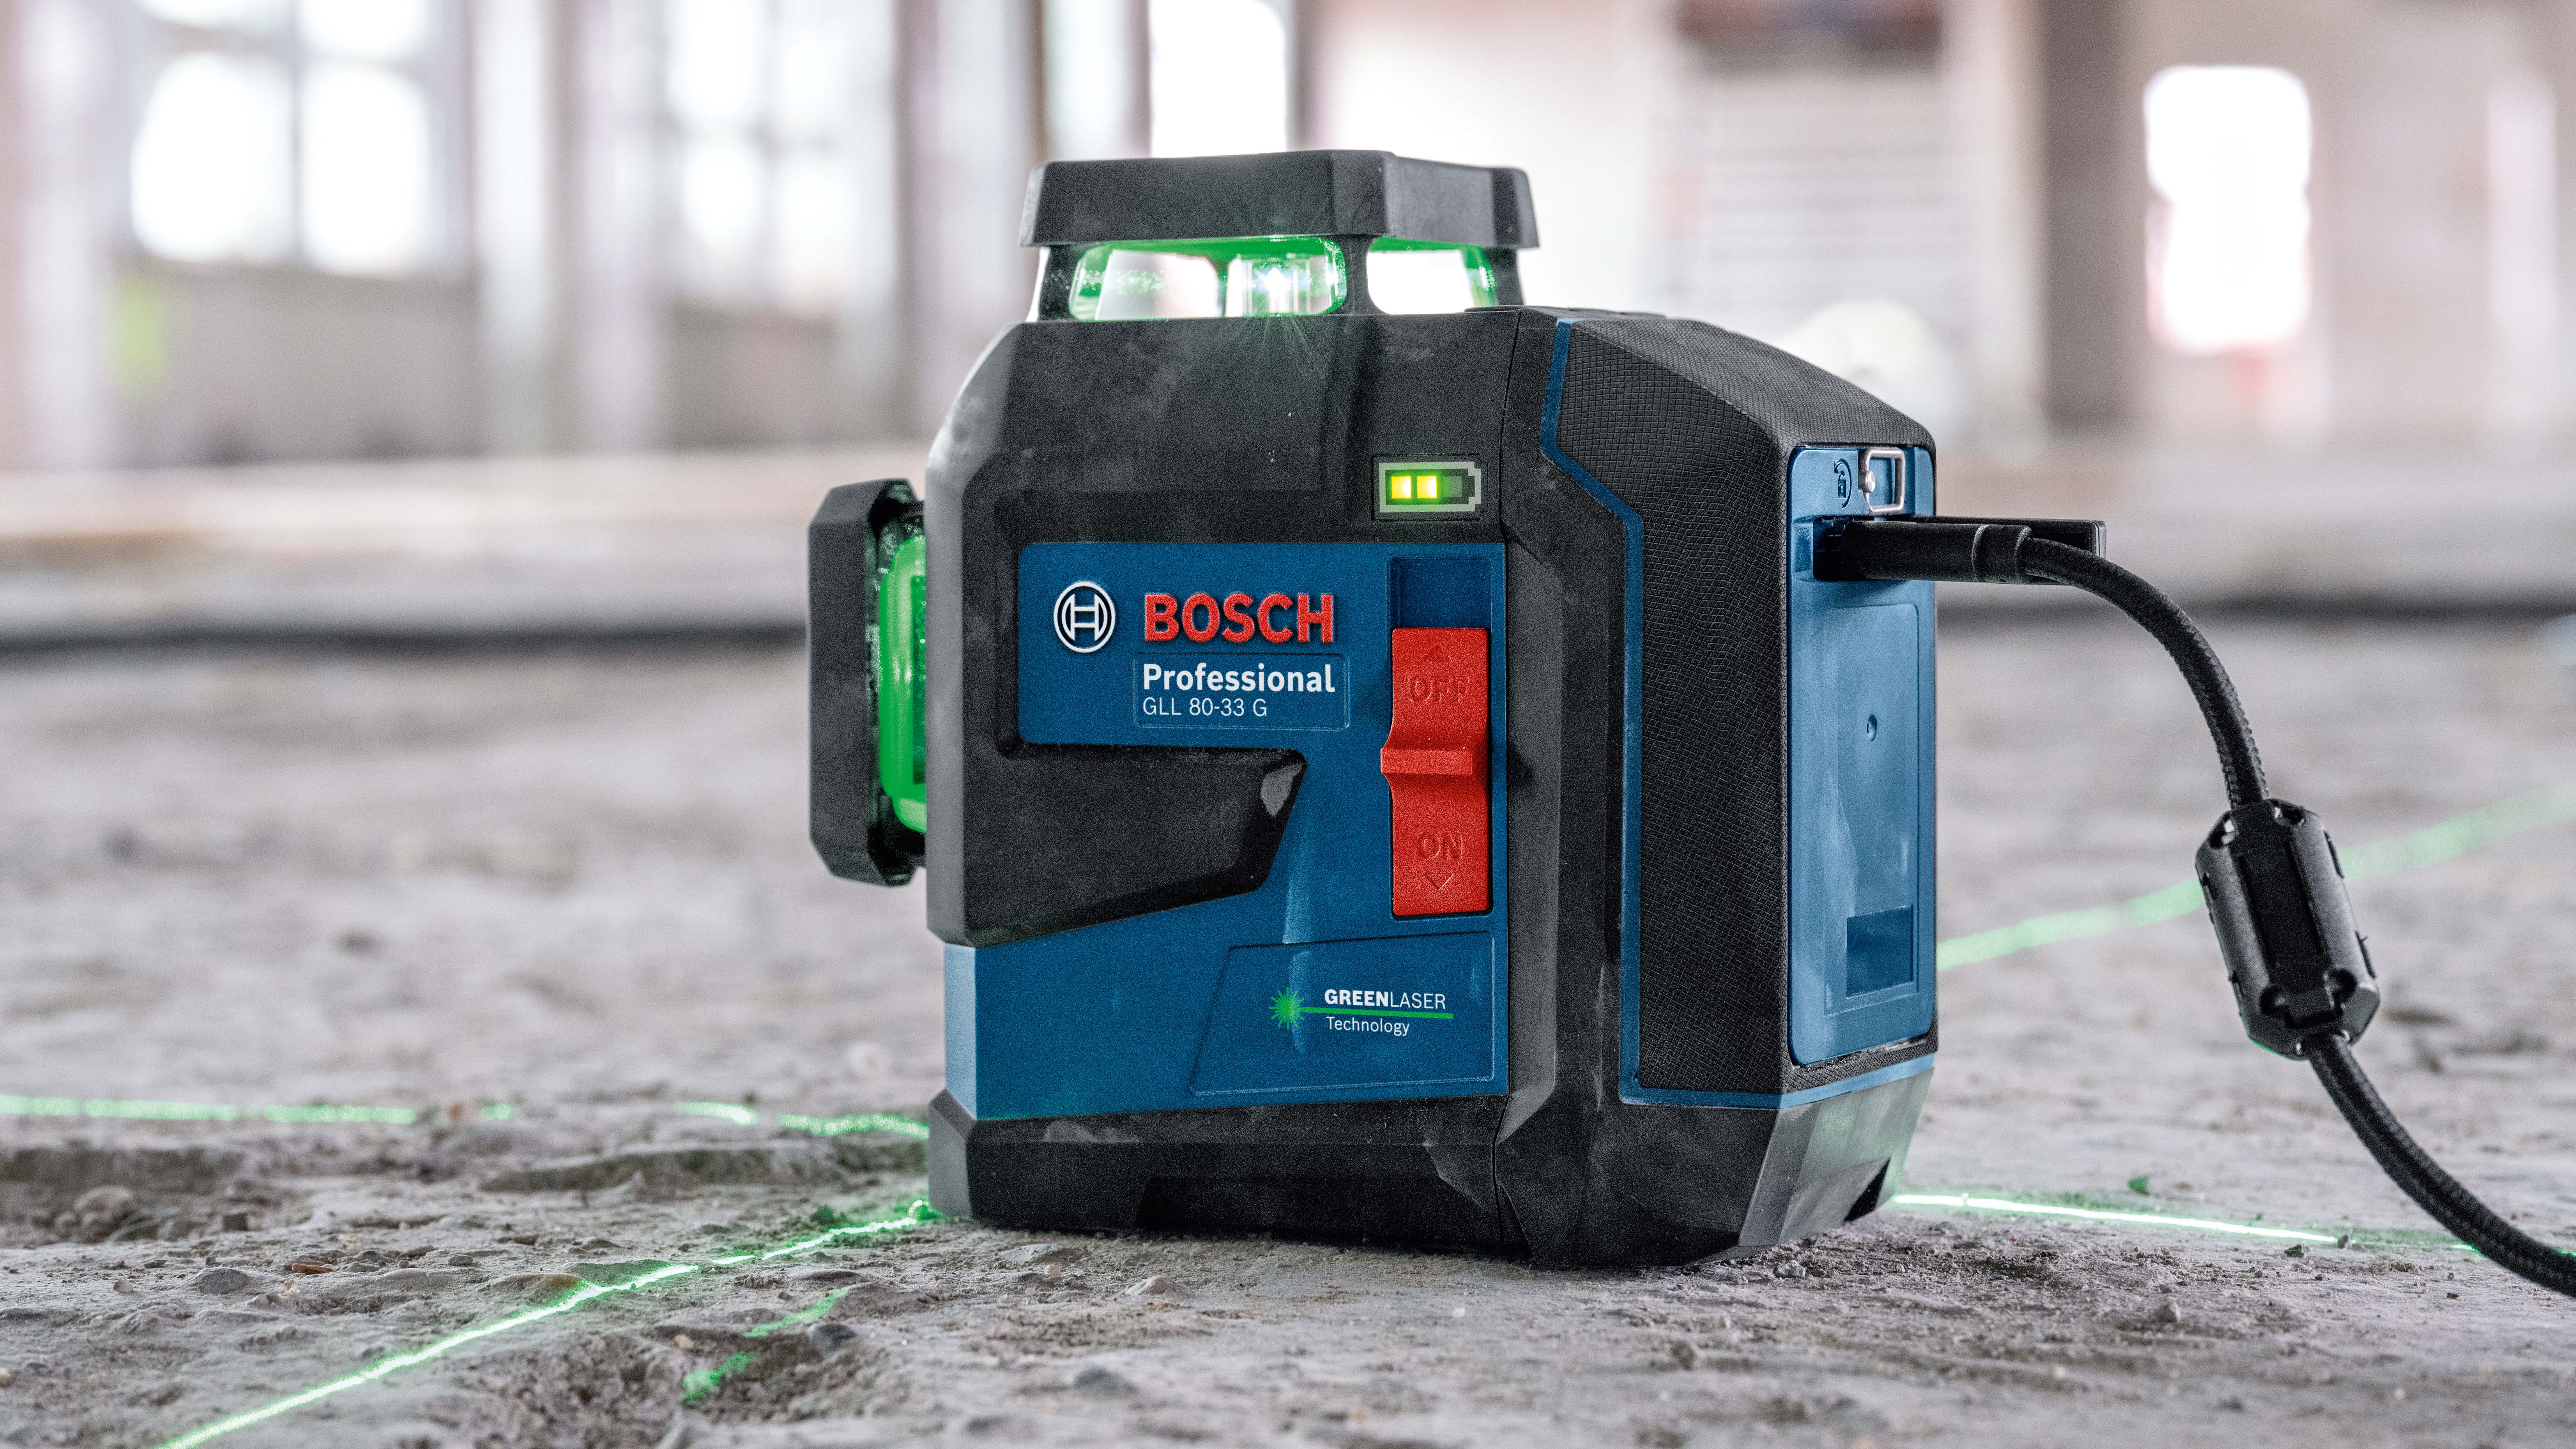 Different power sources for maximum flexibility: Bosch GLL 80-33 G Professional